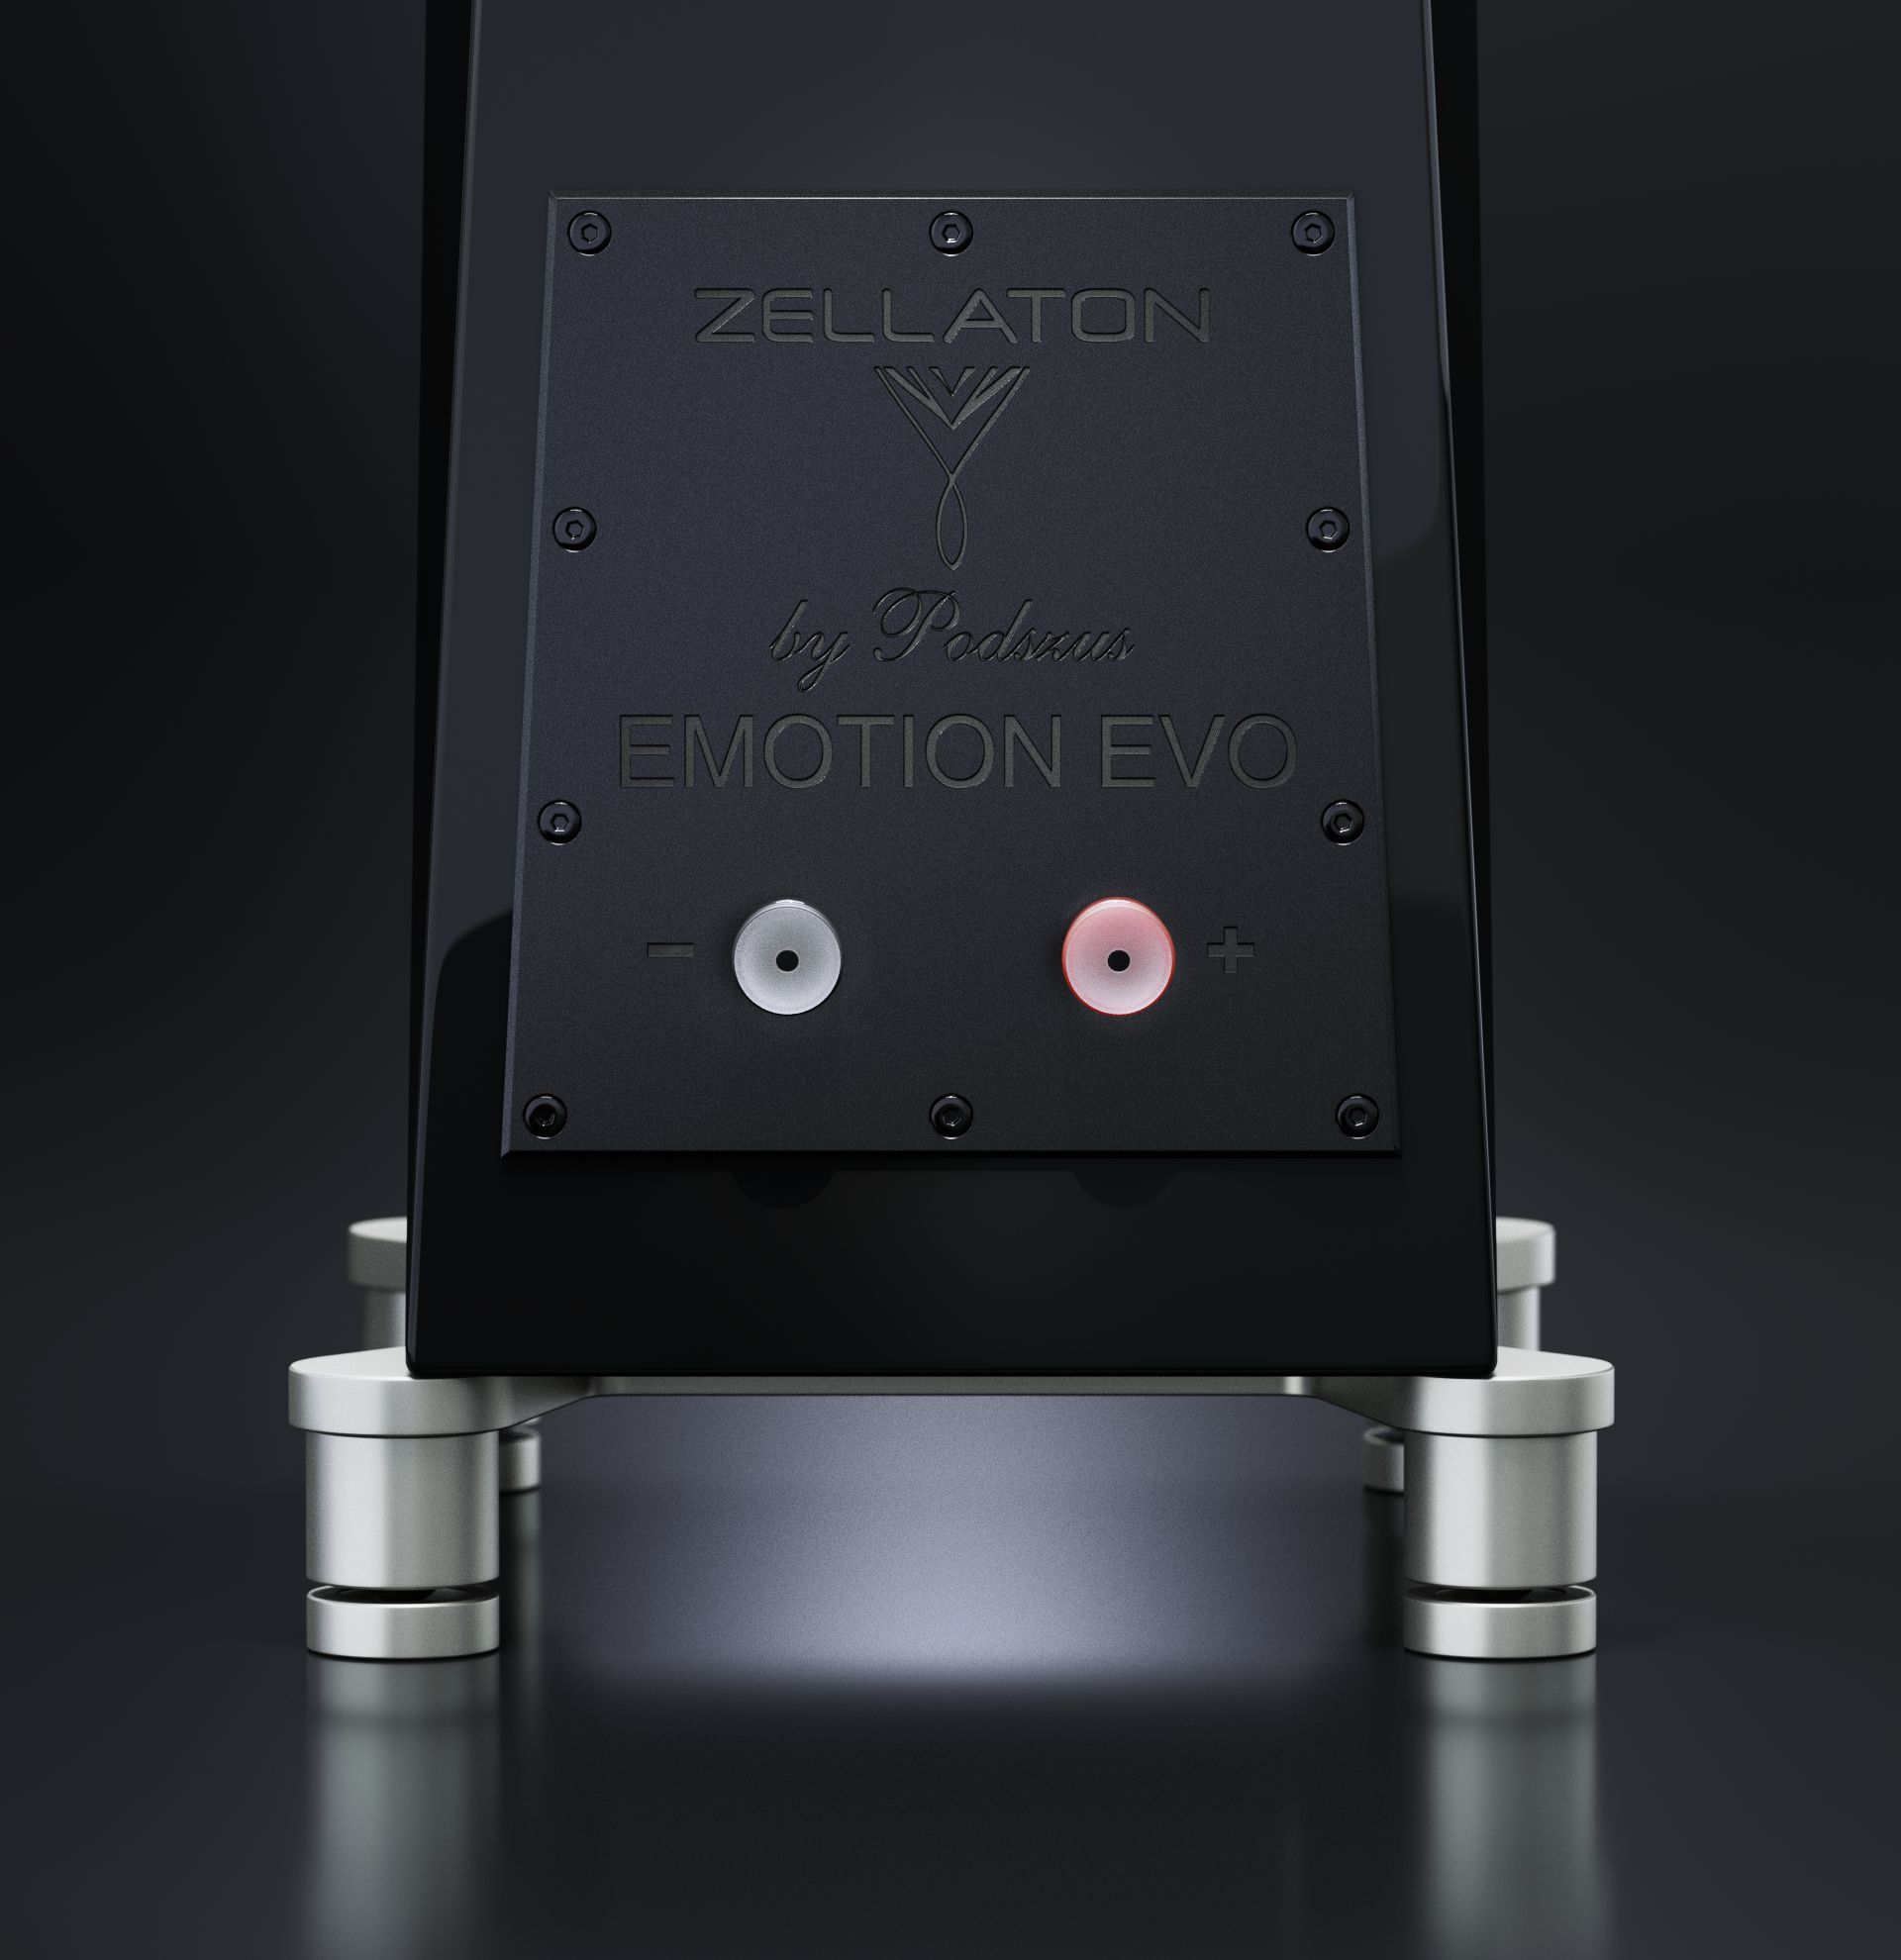 Unique features about <b>Evo Series</b>

